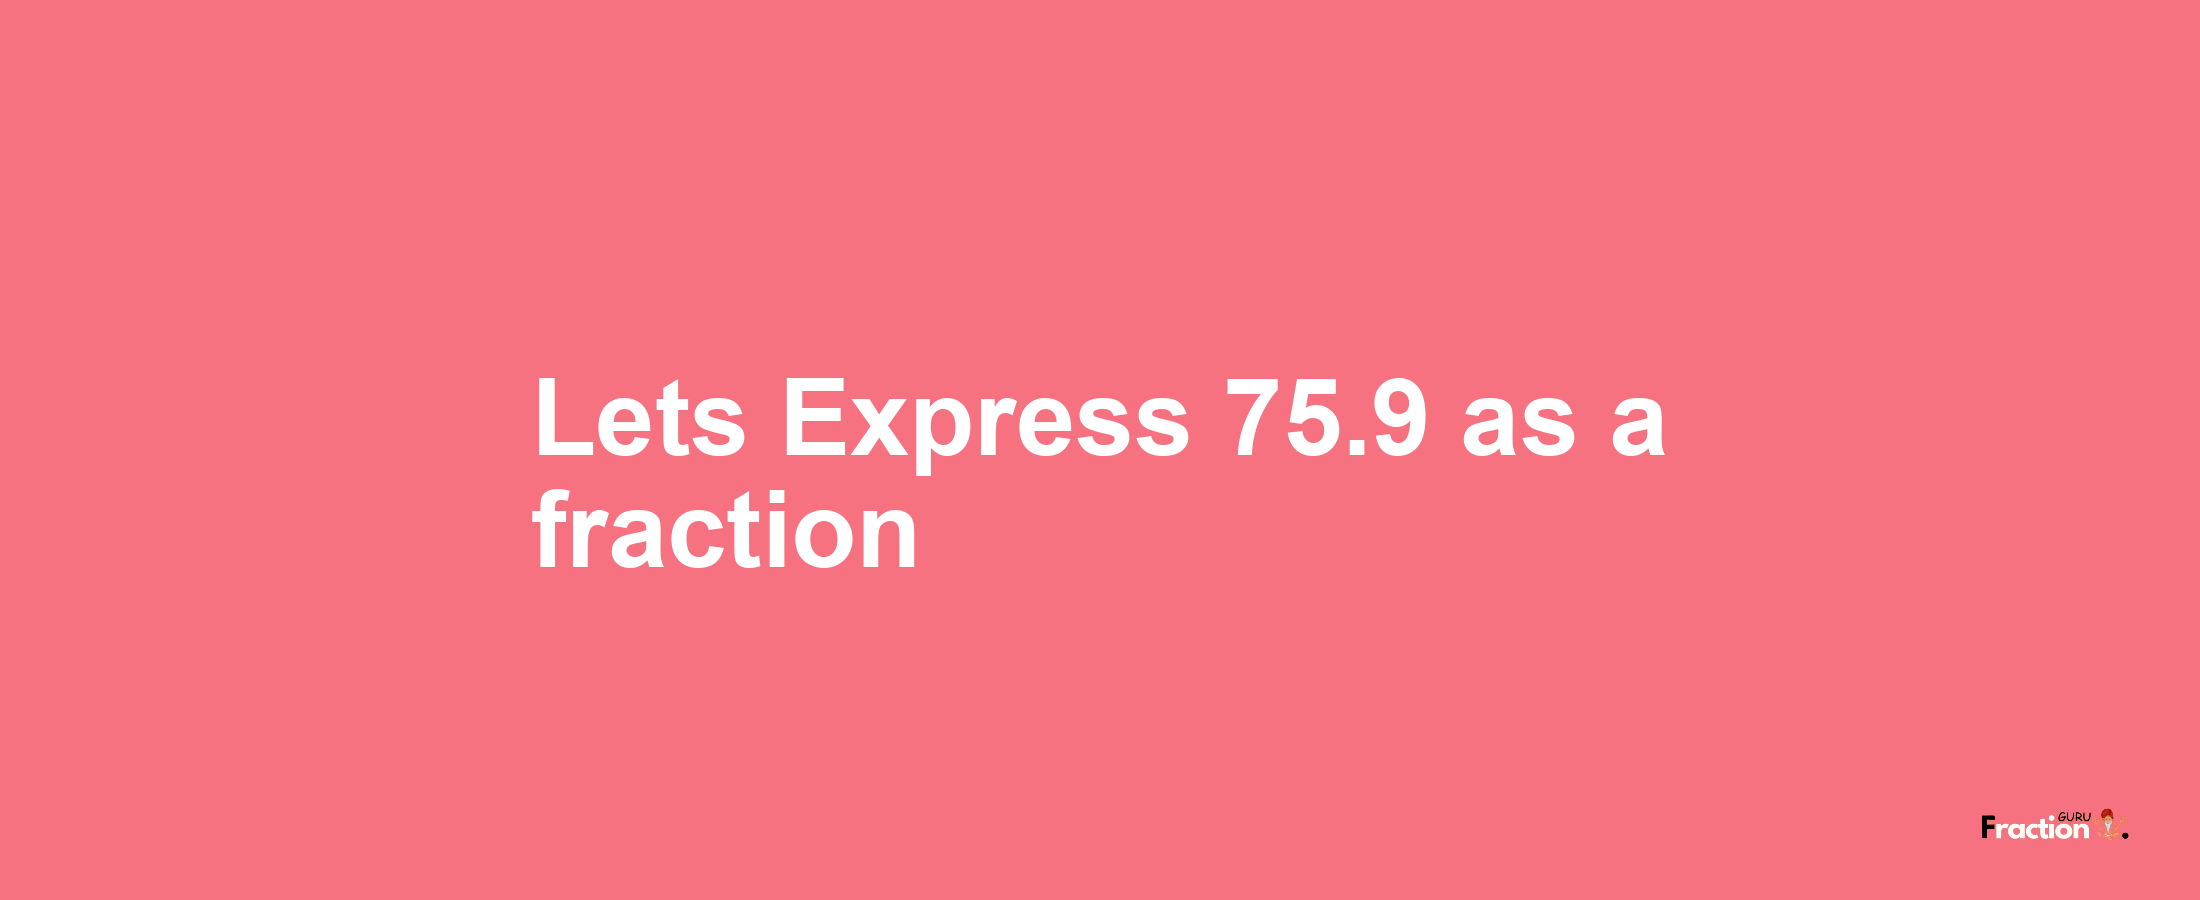 Lets Express 75.9 as afraction